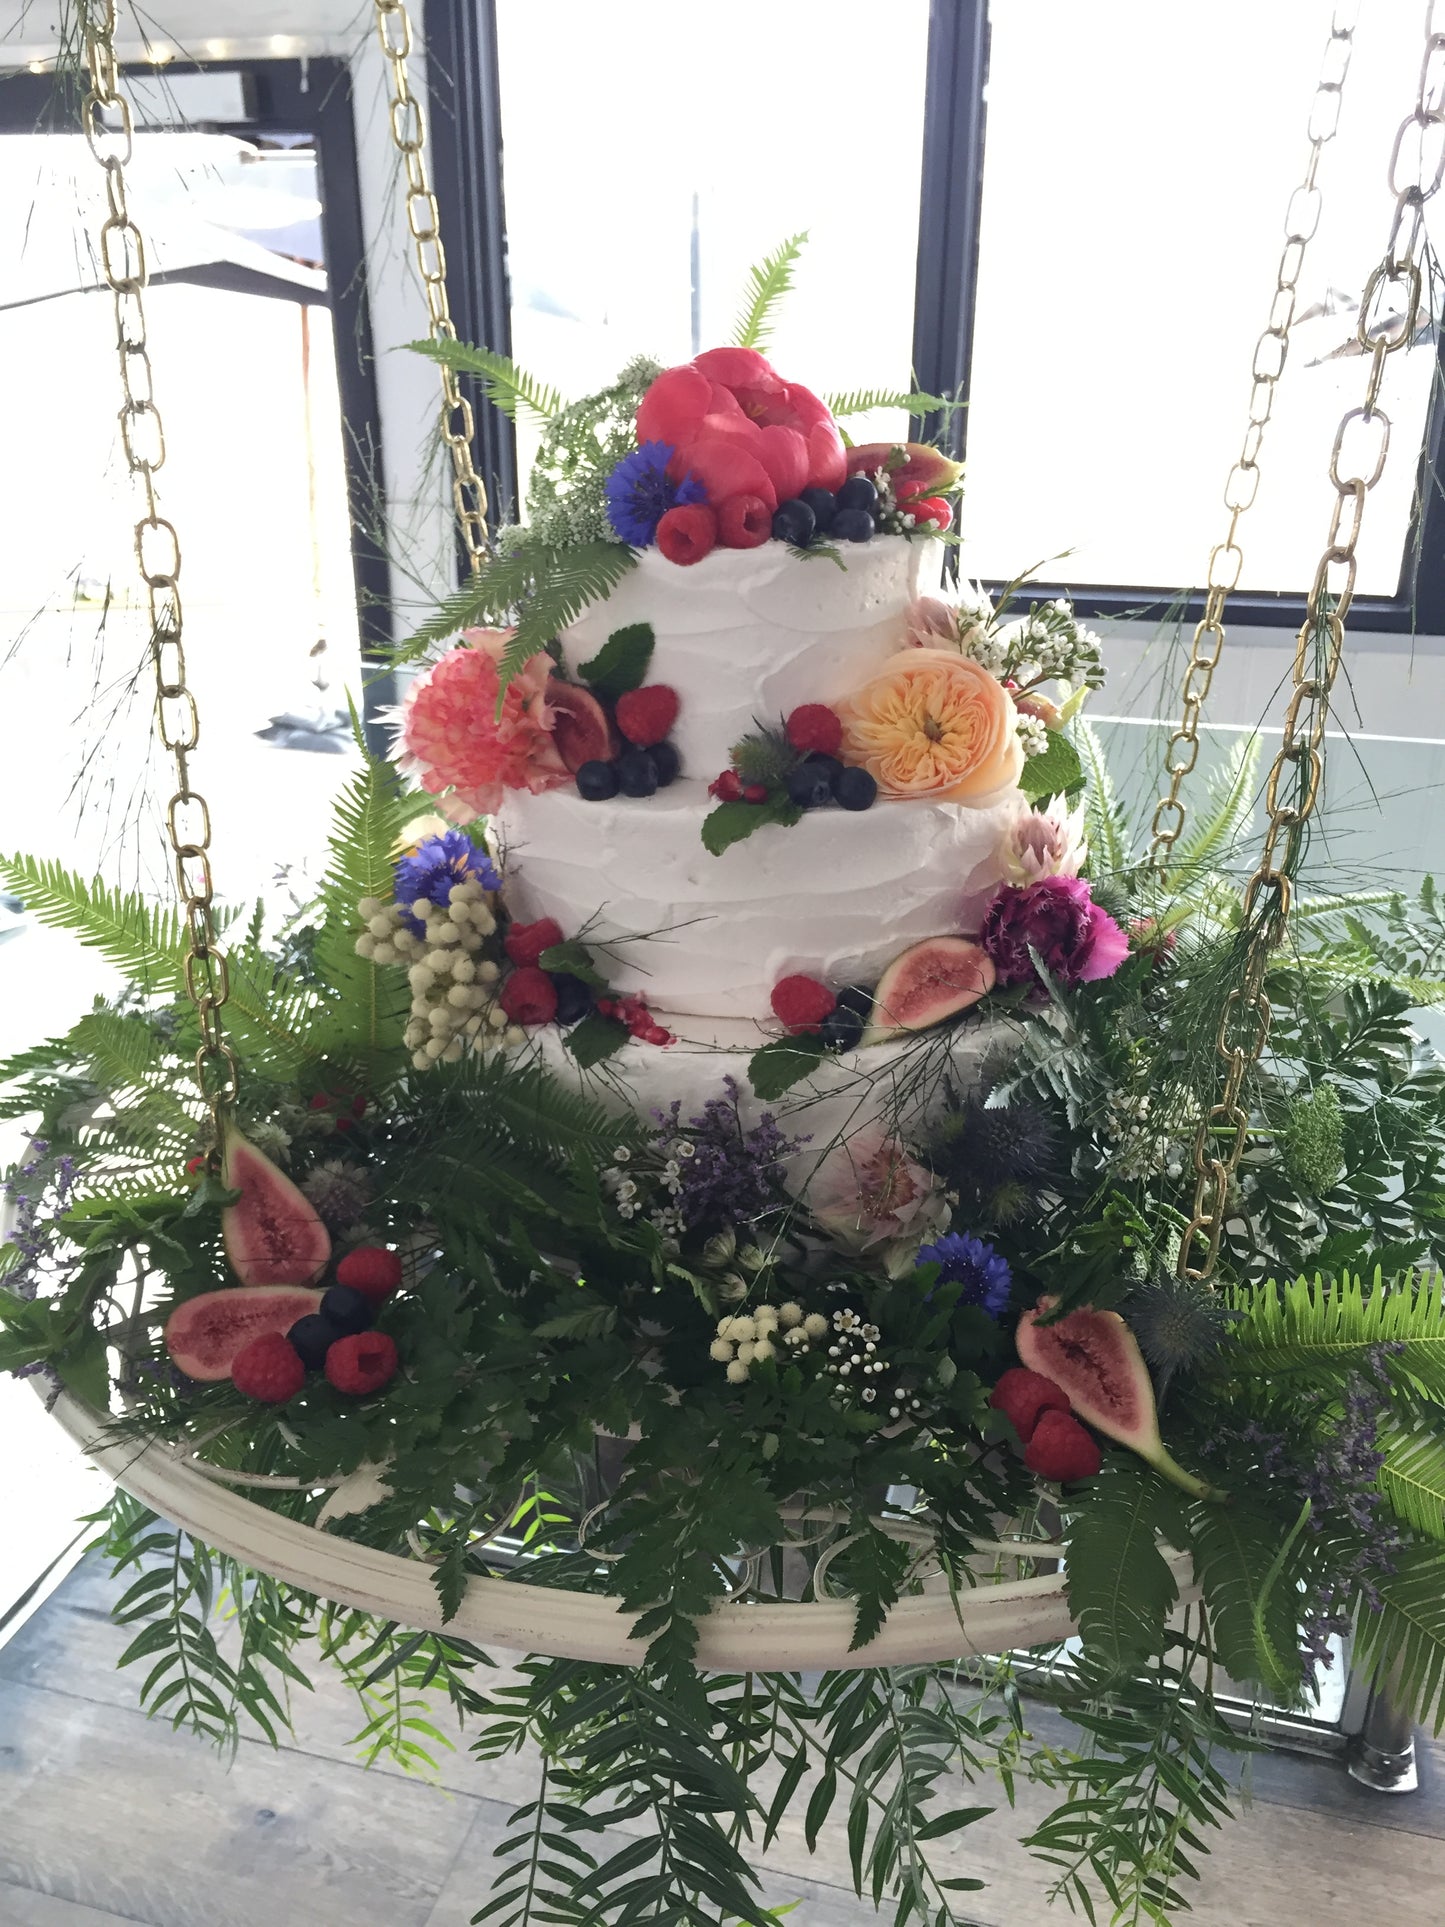 Hanging 3 Tier Cake with figs, fern & Bright Colours